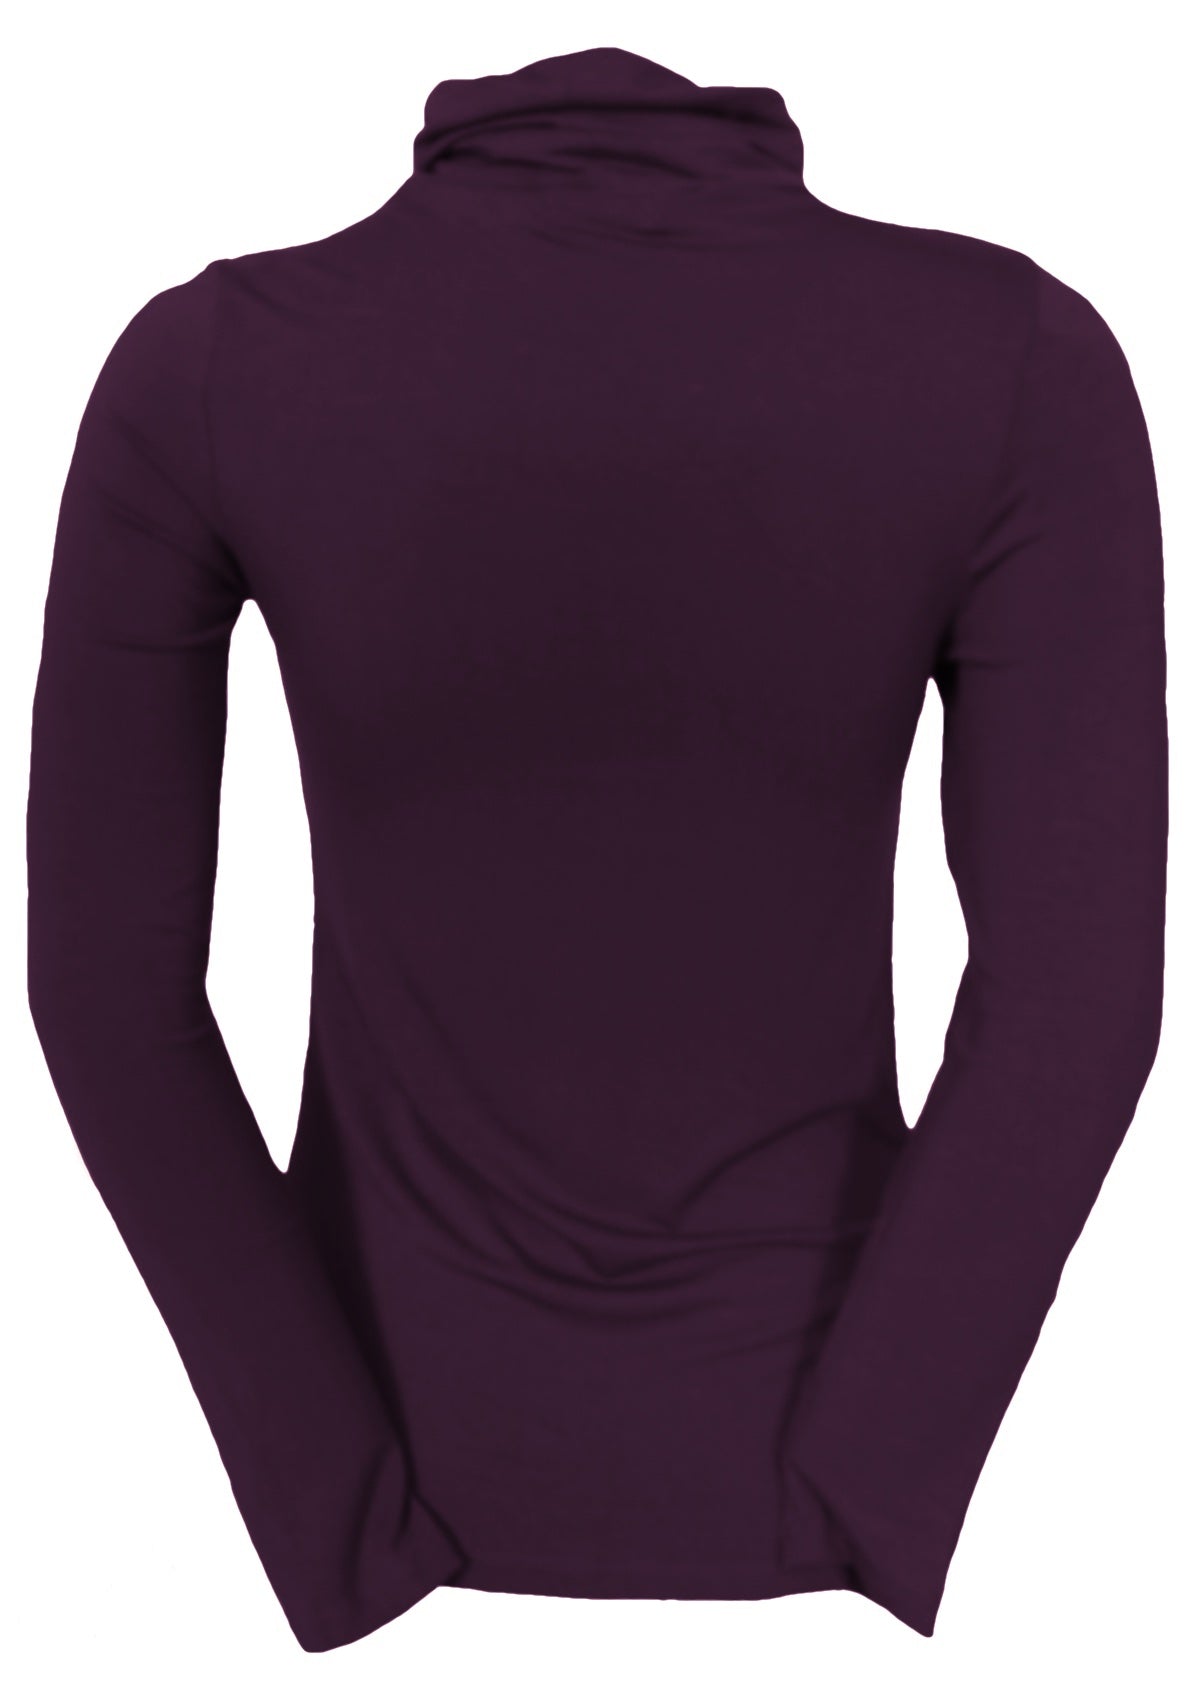 Back view of women's turtle neck purple fitted long sleeve soft stretch rayon top.